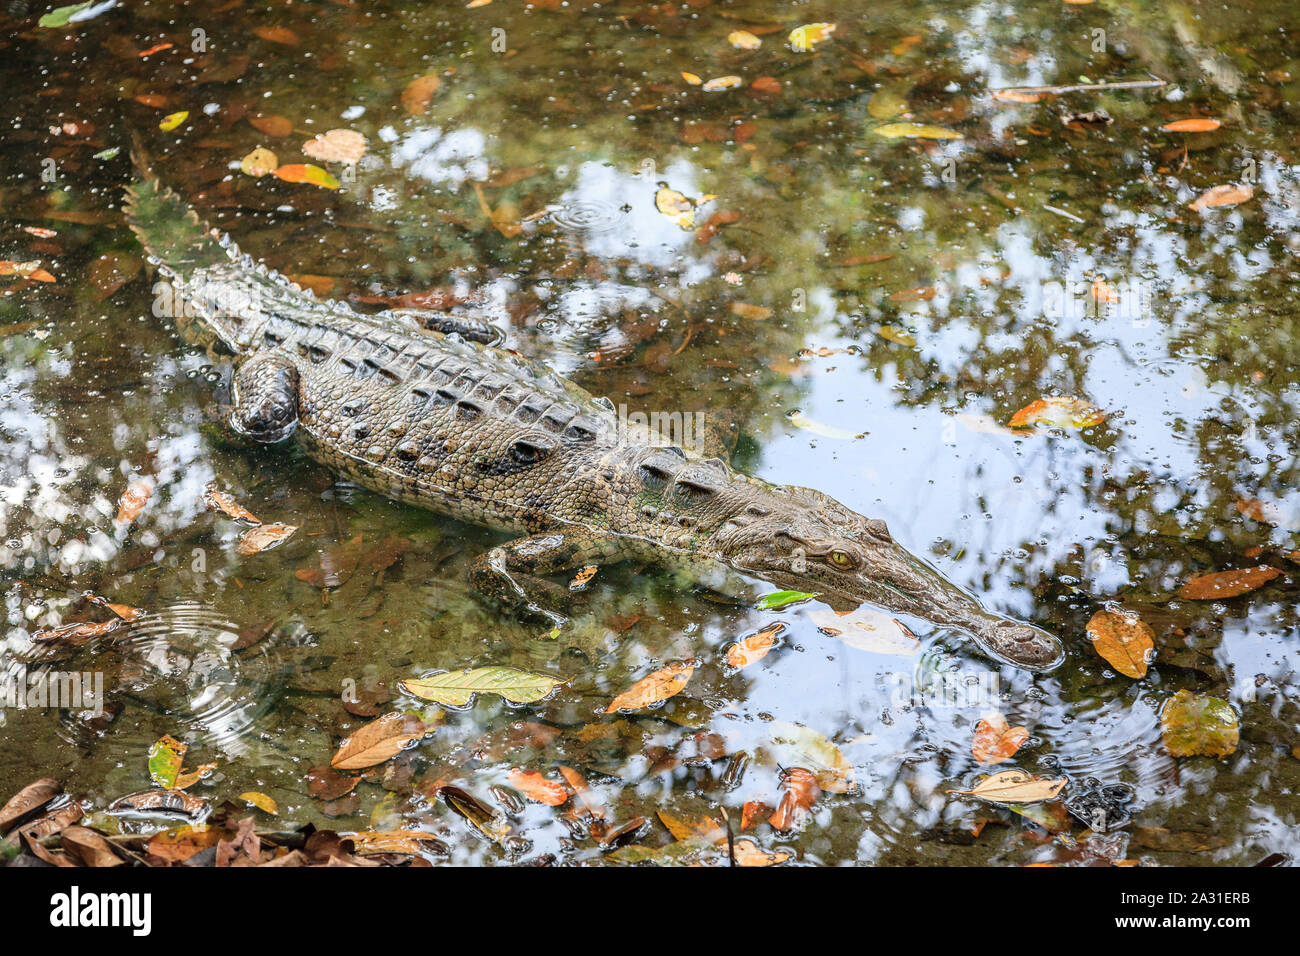 Close-up image of a large crocodile in a shallow lagoon in Manuel Antonio National Park in Costa Rica Stock Photo